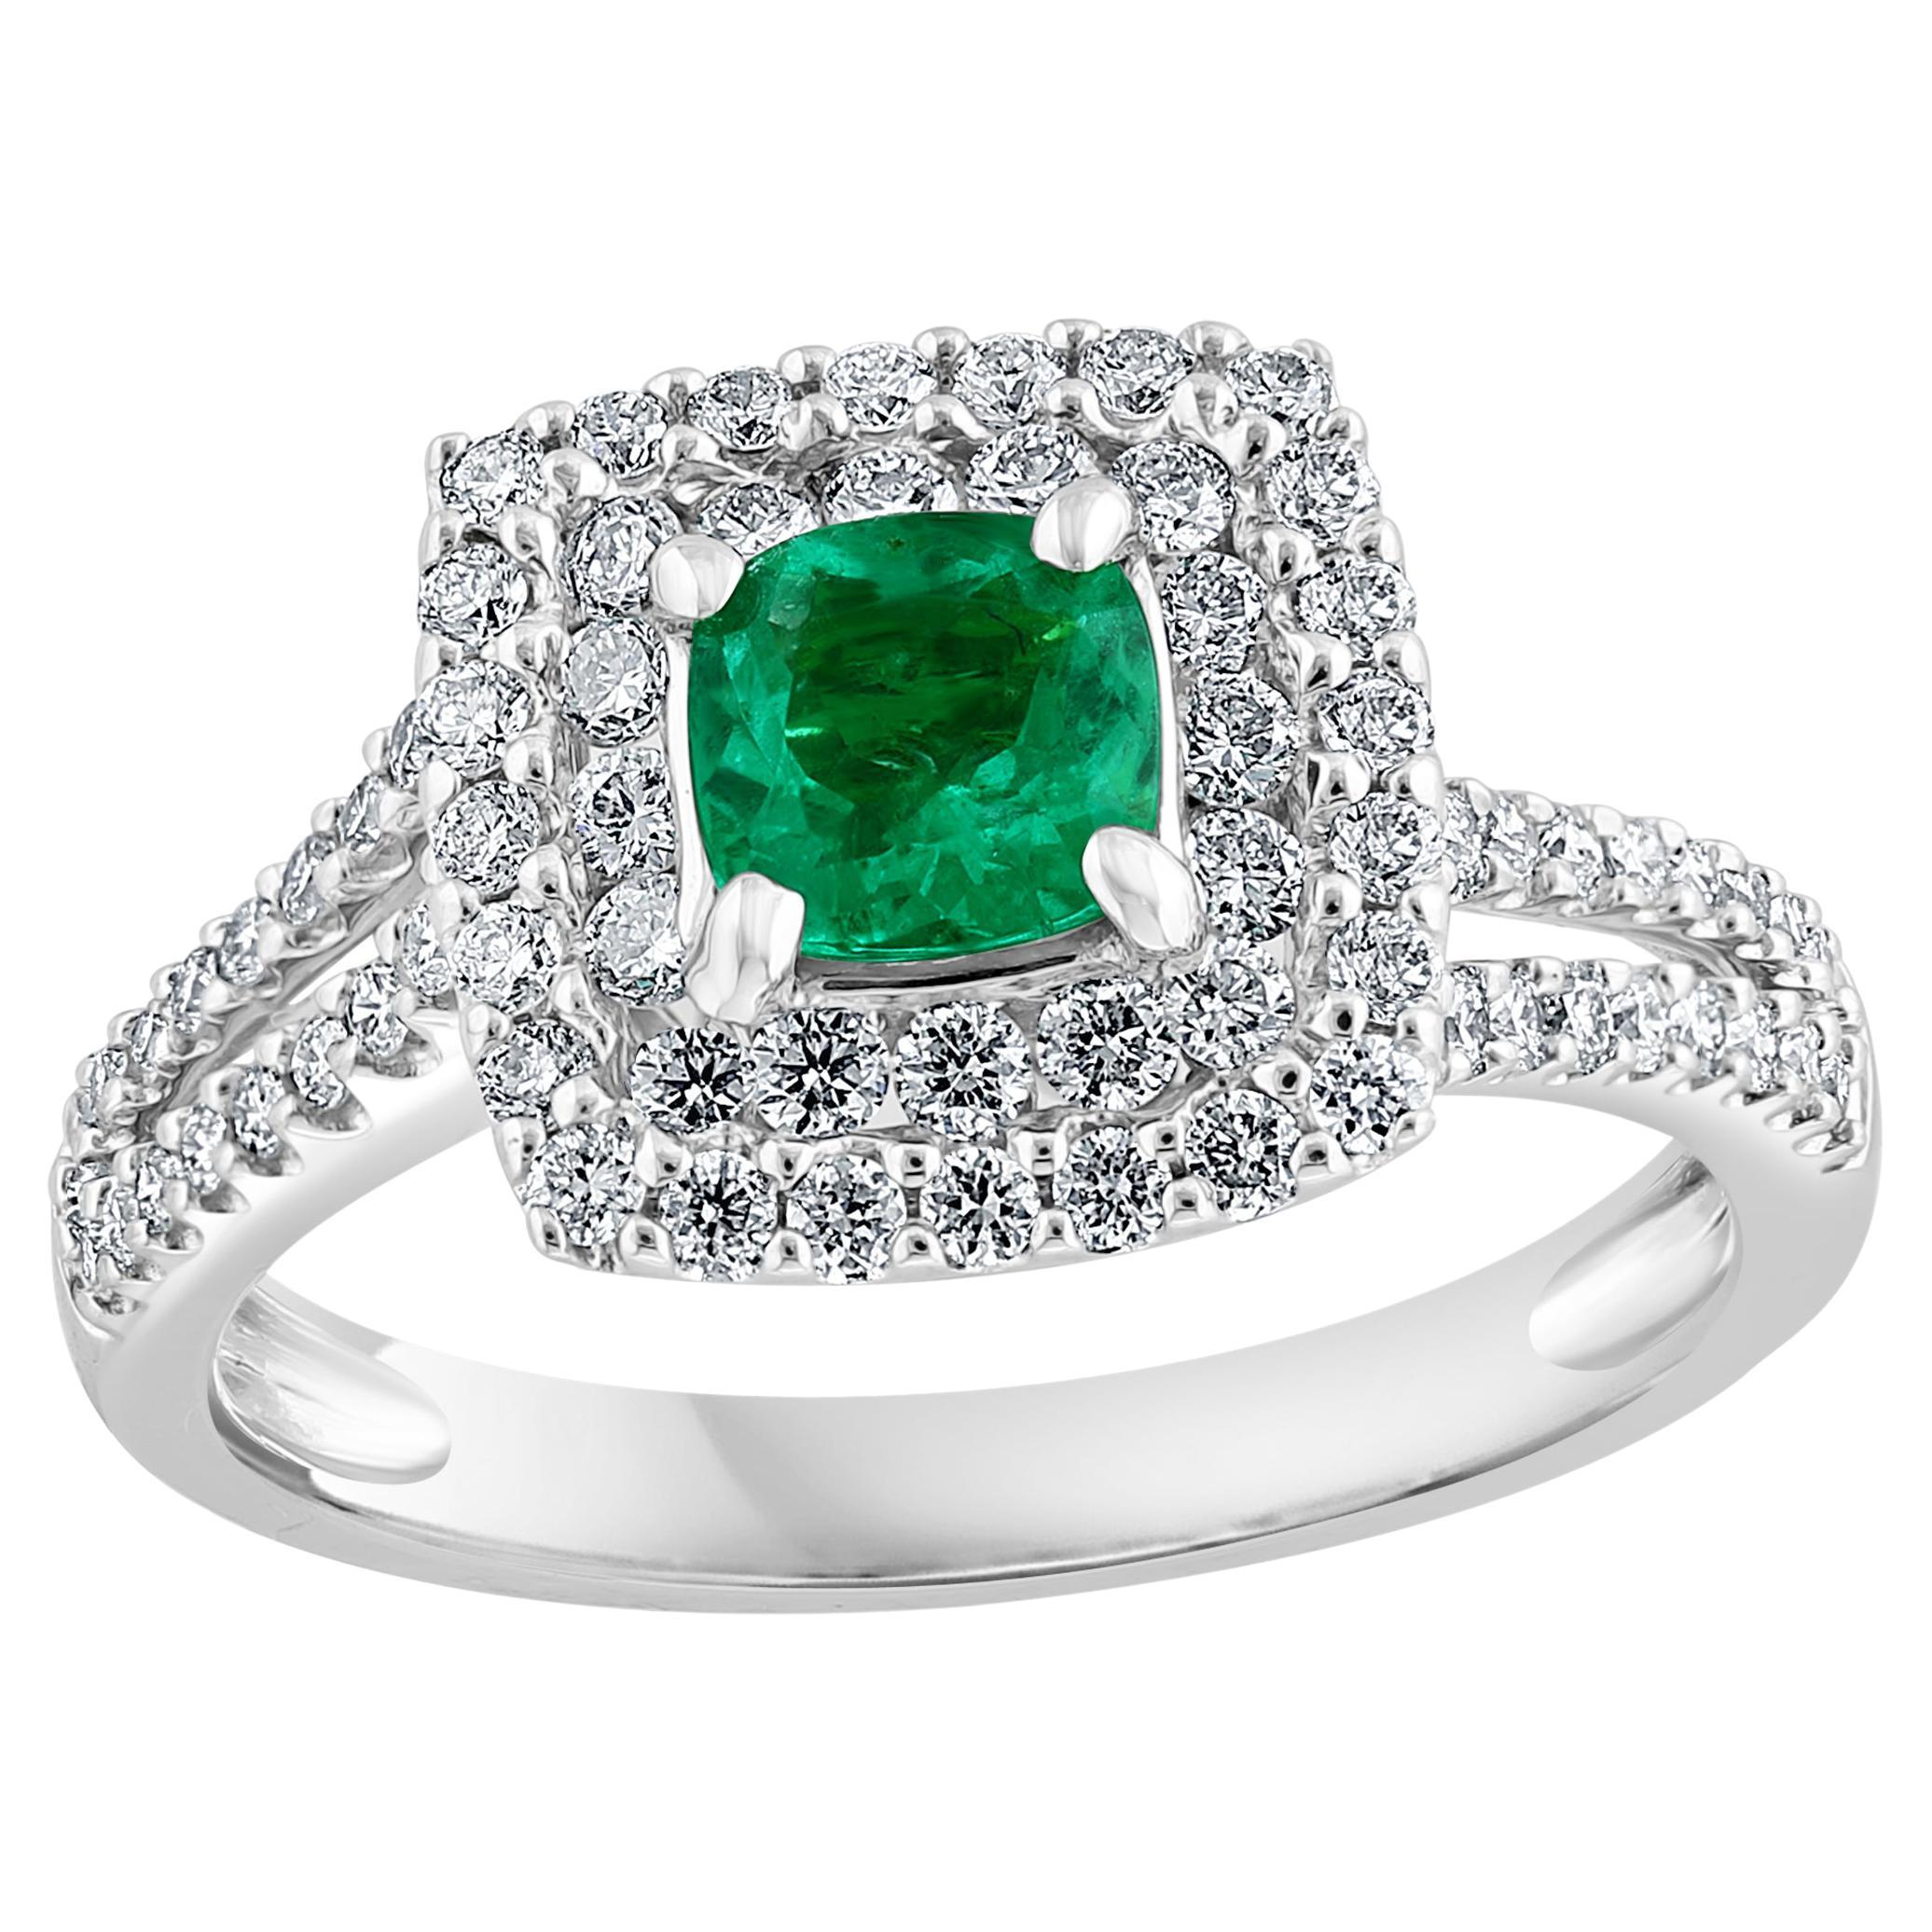 0.48 Carat Cushion Cut Emerald and Diamond Fashion Ring in 18K White Gold For Sale